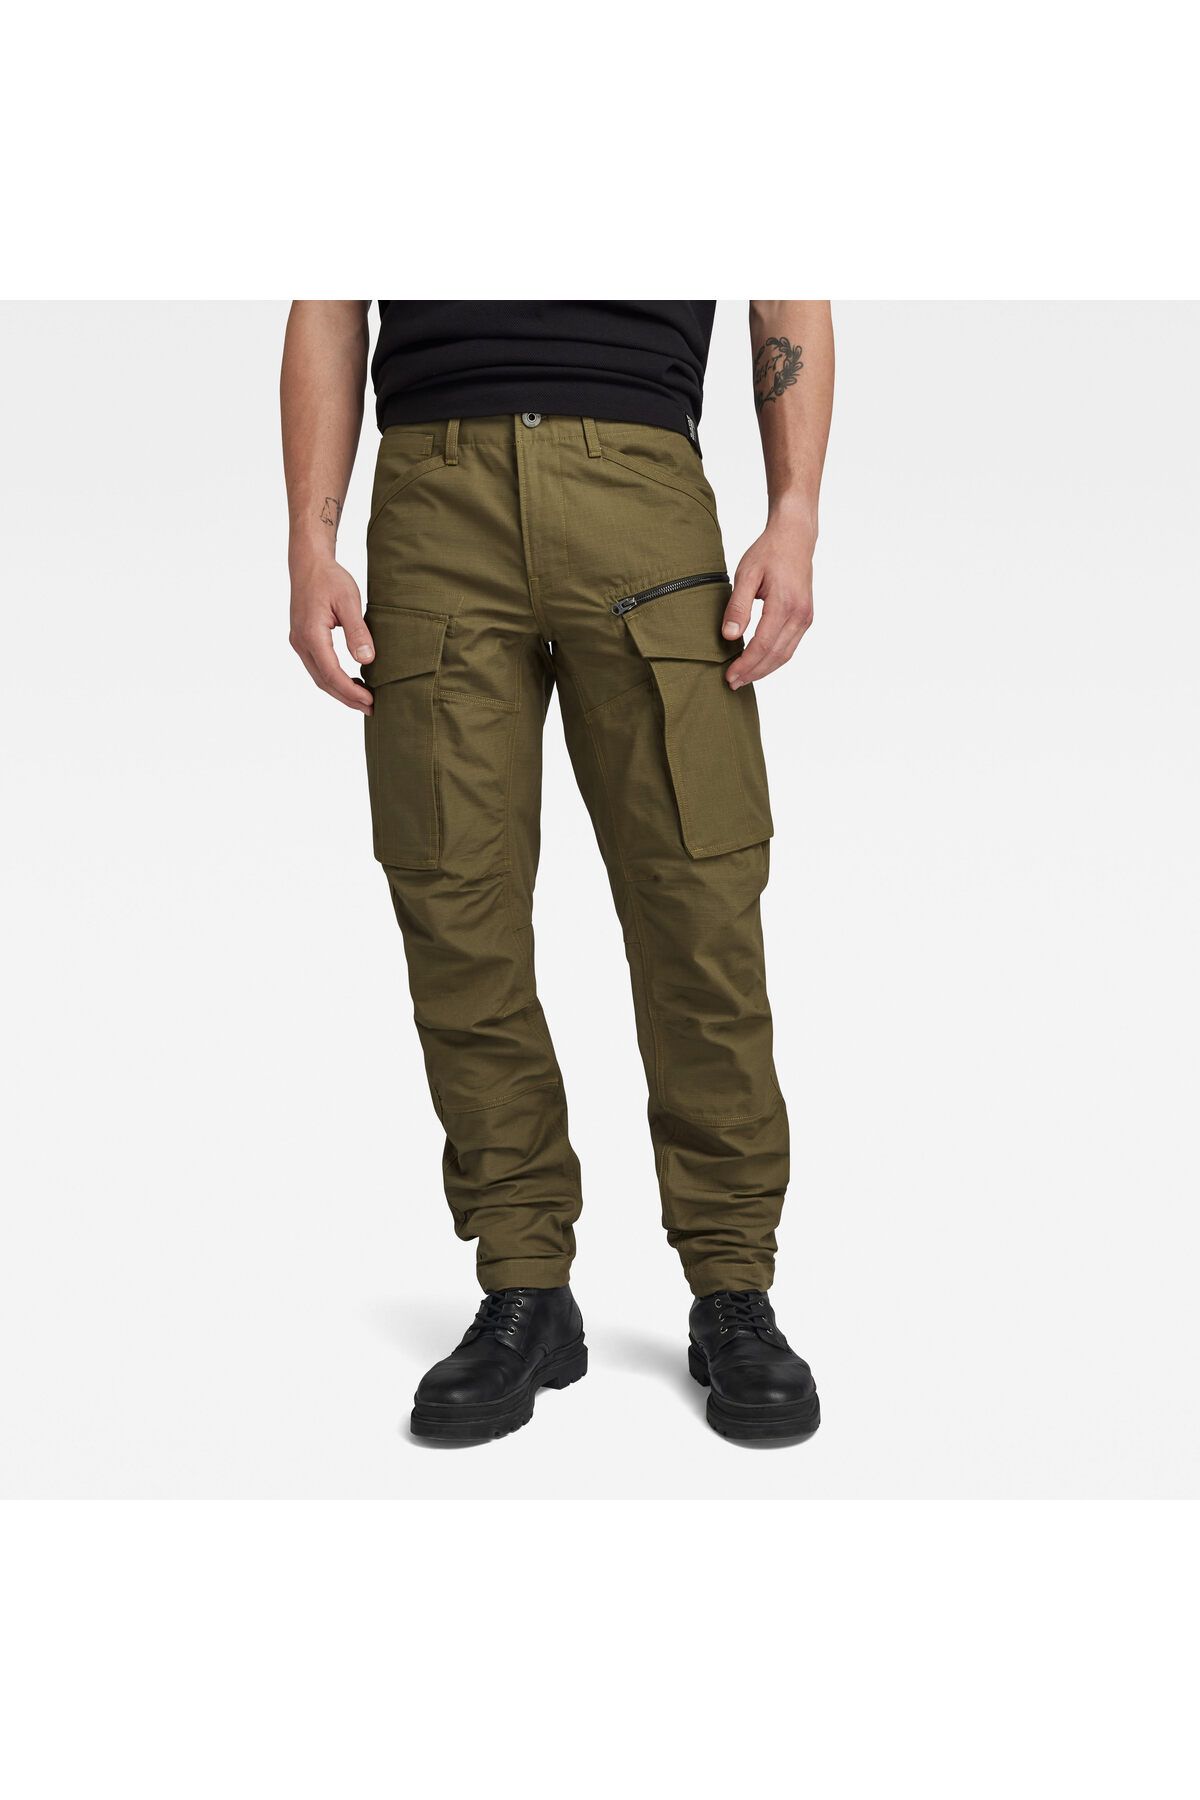 Buy G-Star Rovic Zip 3d Regular Tapered Fit Pants (D02190-D387) green from  £47.30 (Today) – Best Deals on idealo.co.uk